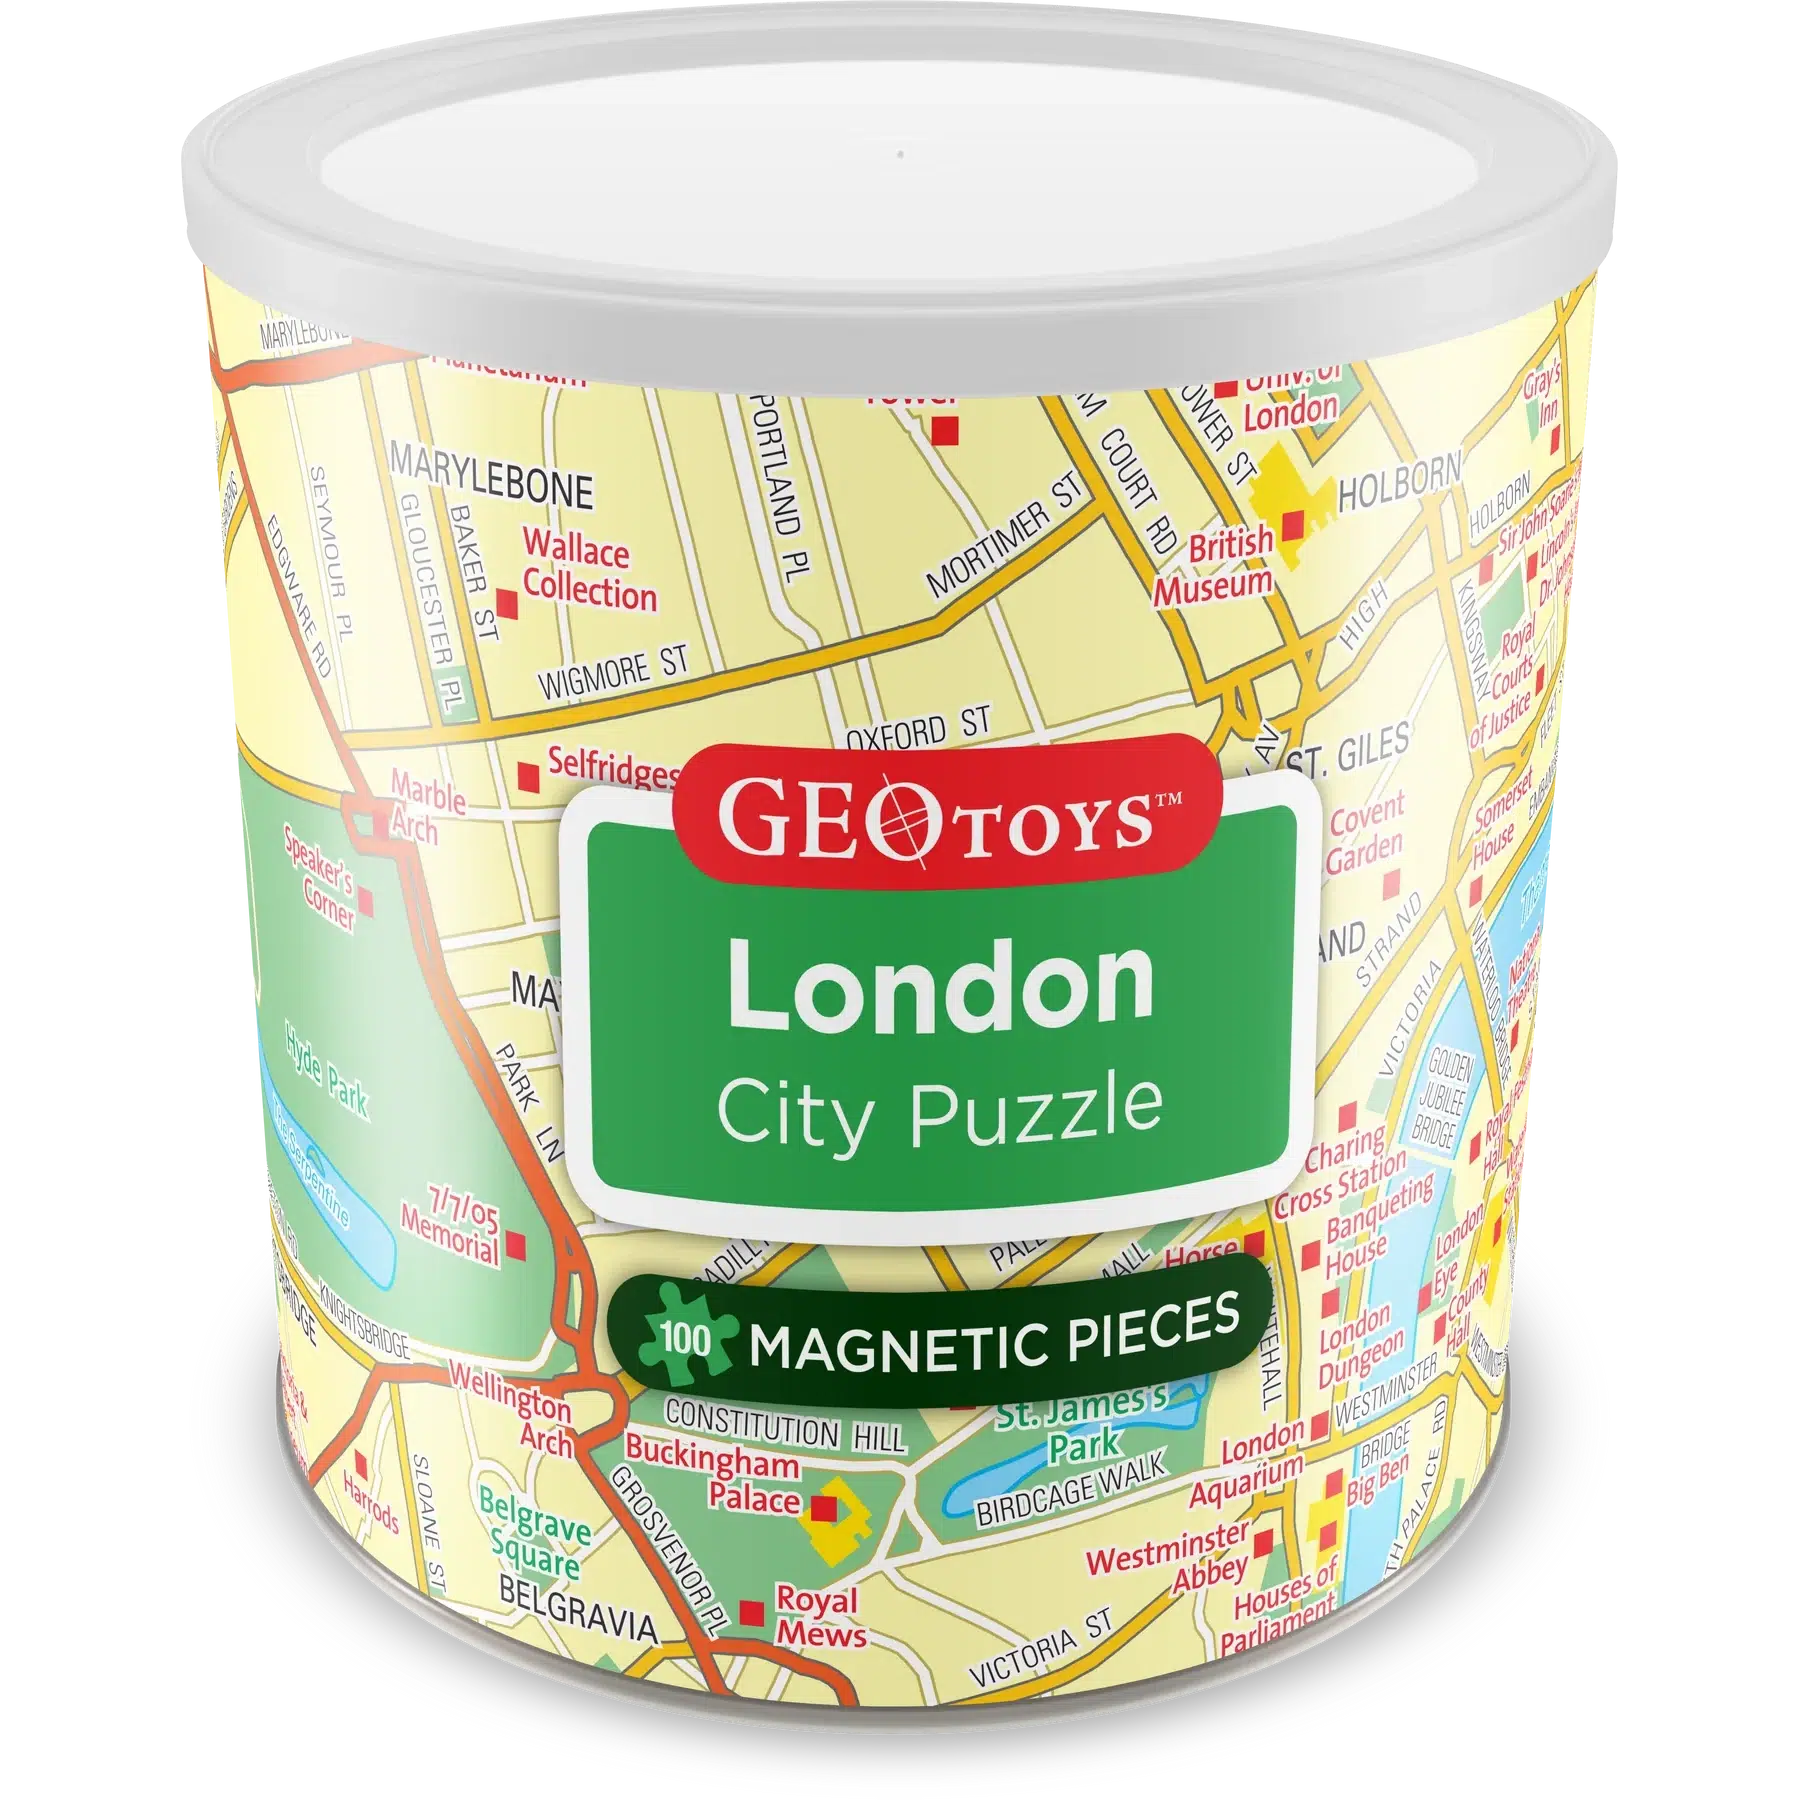 London City 100 Piece Magnetic Jigsaw Puzzle Geotoys